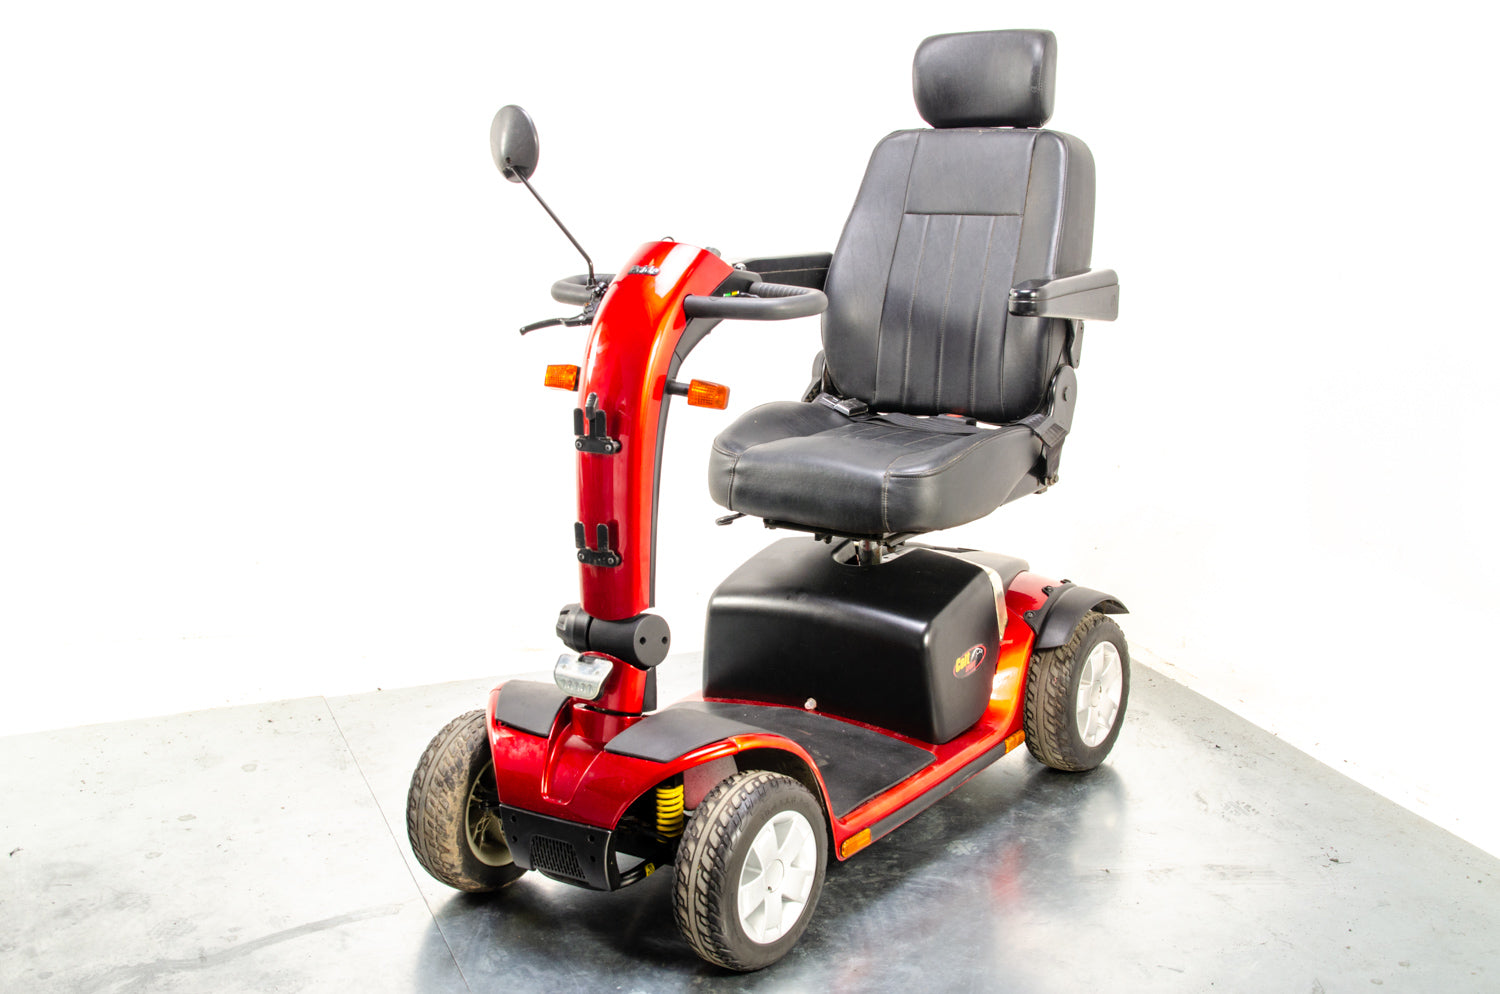 Pride Colt Sport Used Electric Mobility Scooter 8mph Transportable Suspension Pavement Road Legal Red 13379